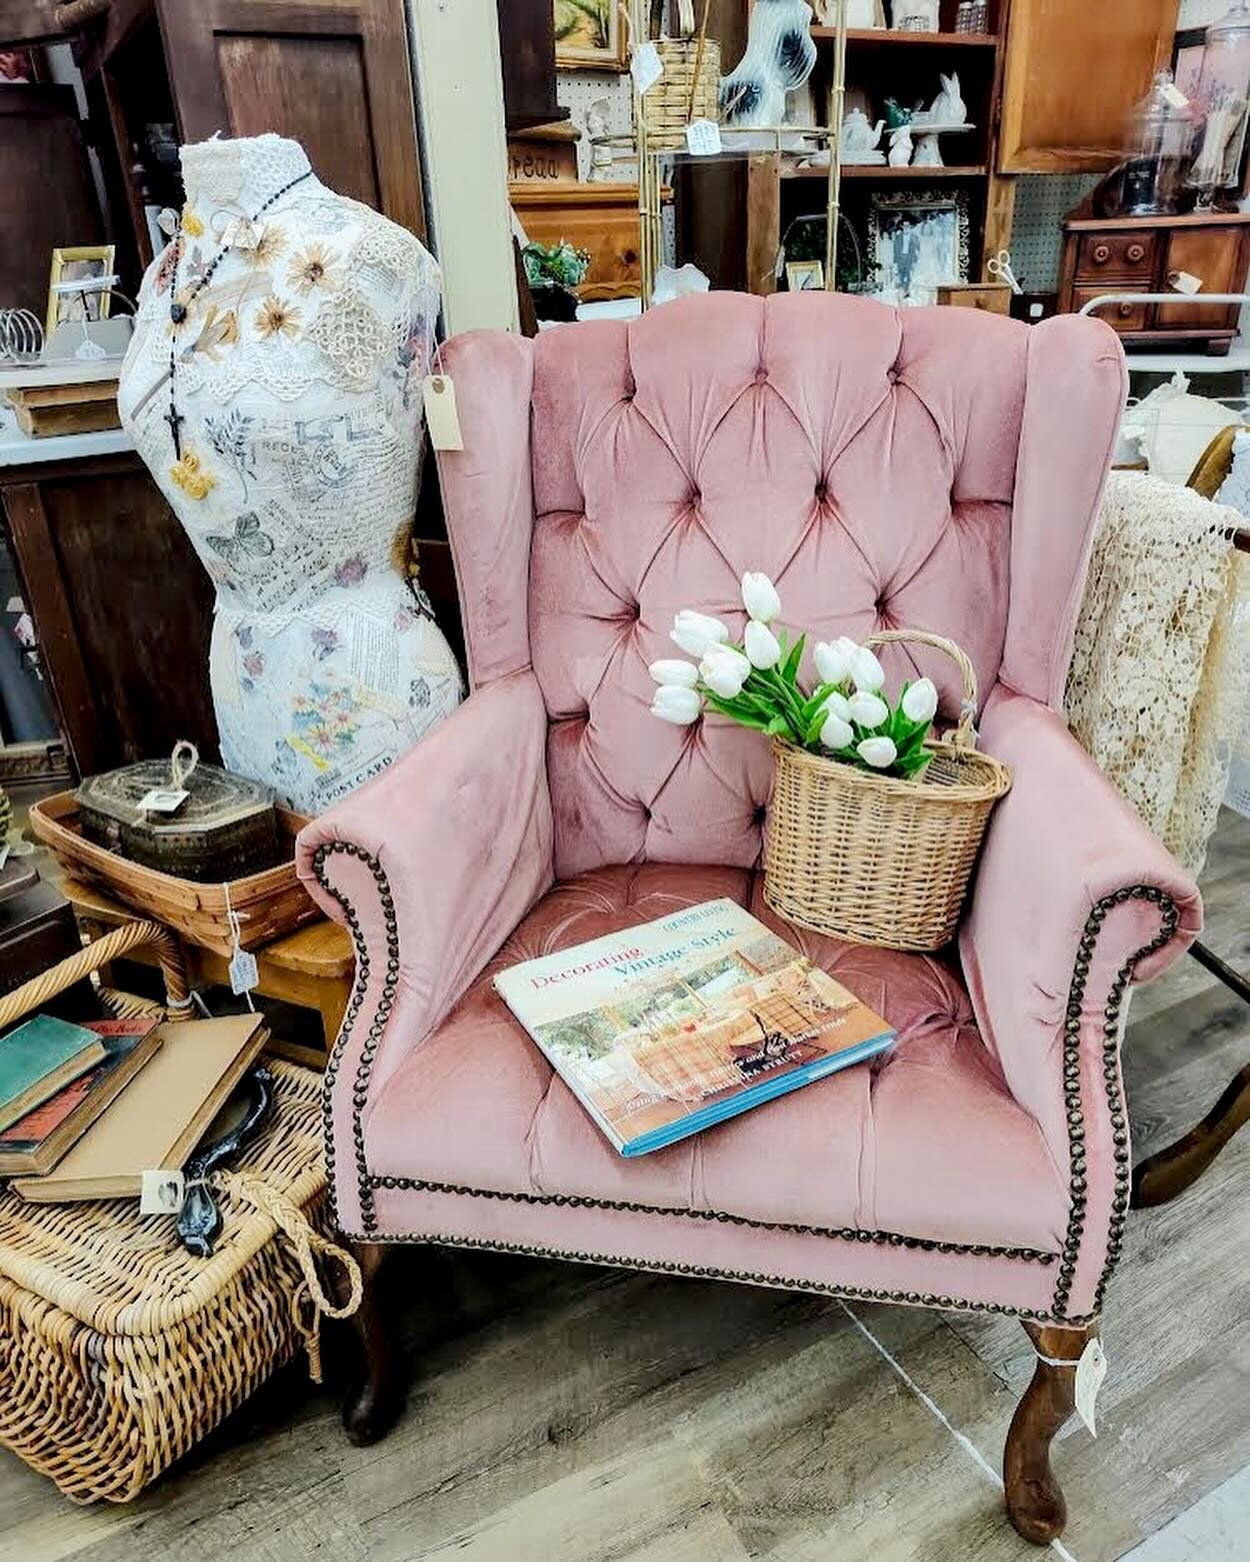 💗 Buford is PRETTY IN PINK and here to kick off this week&rsquo;s theme of&hellip;.🌸 COLORS 👑

Check out our Stories + meet up with Kristyn from @overtherainbowvintage in strolling around Buford this rainy afternoon!

Swipe to see all the pretty p